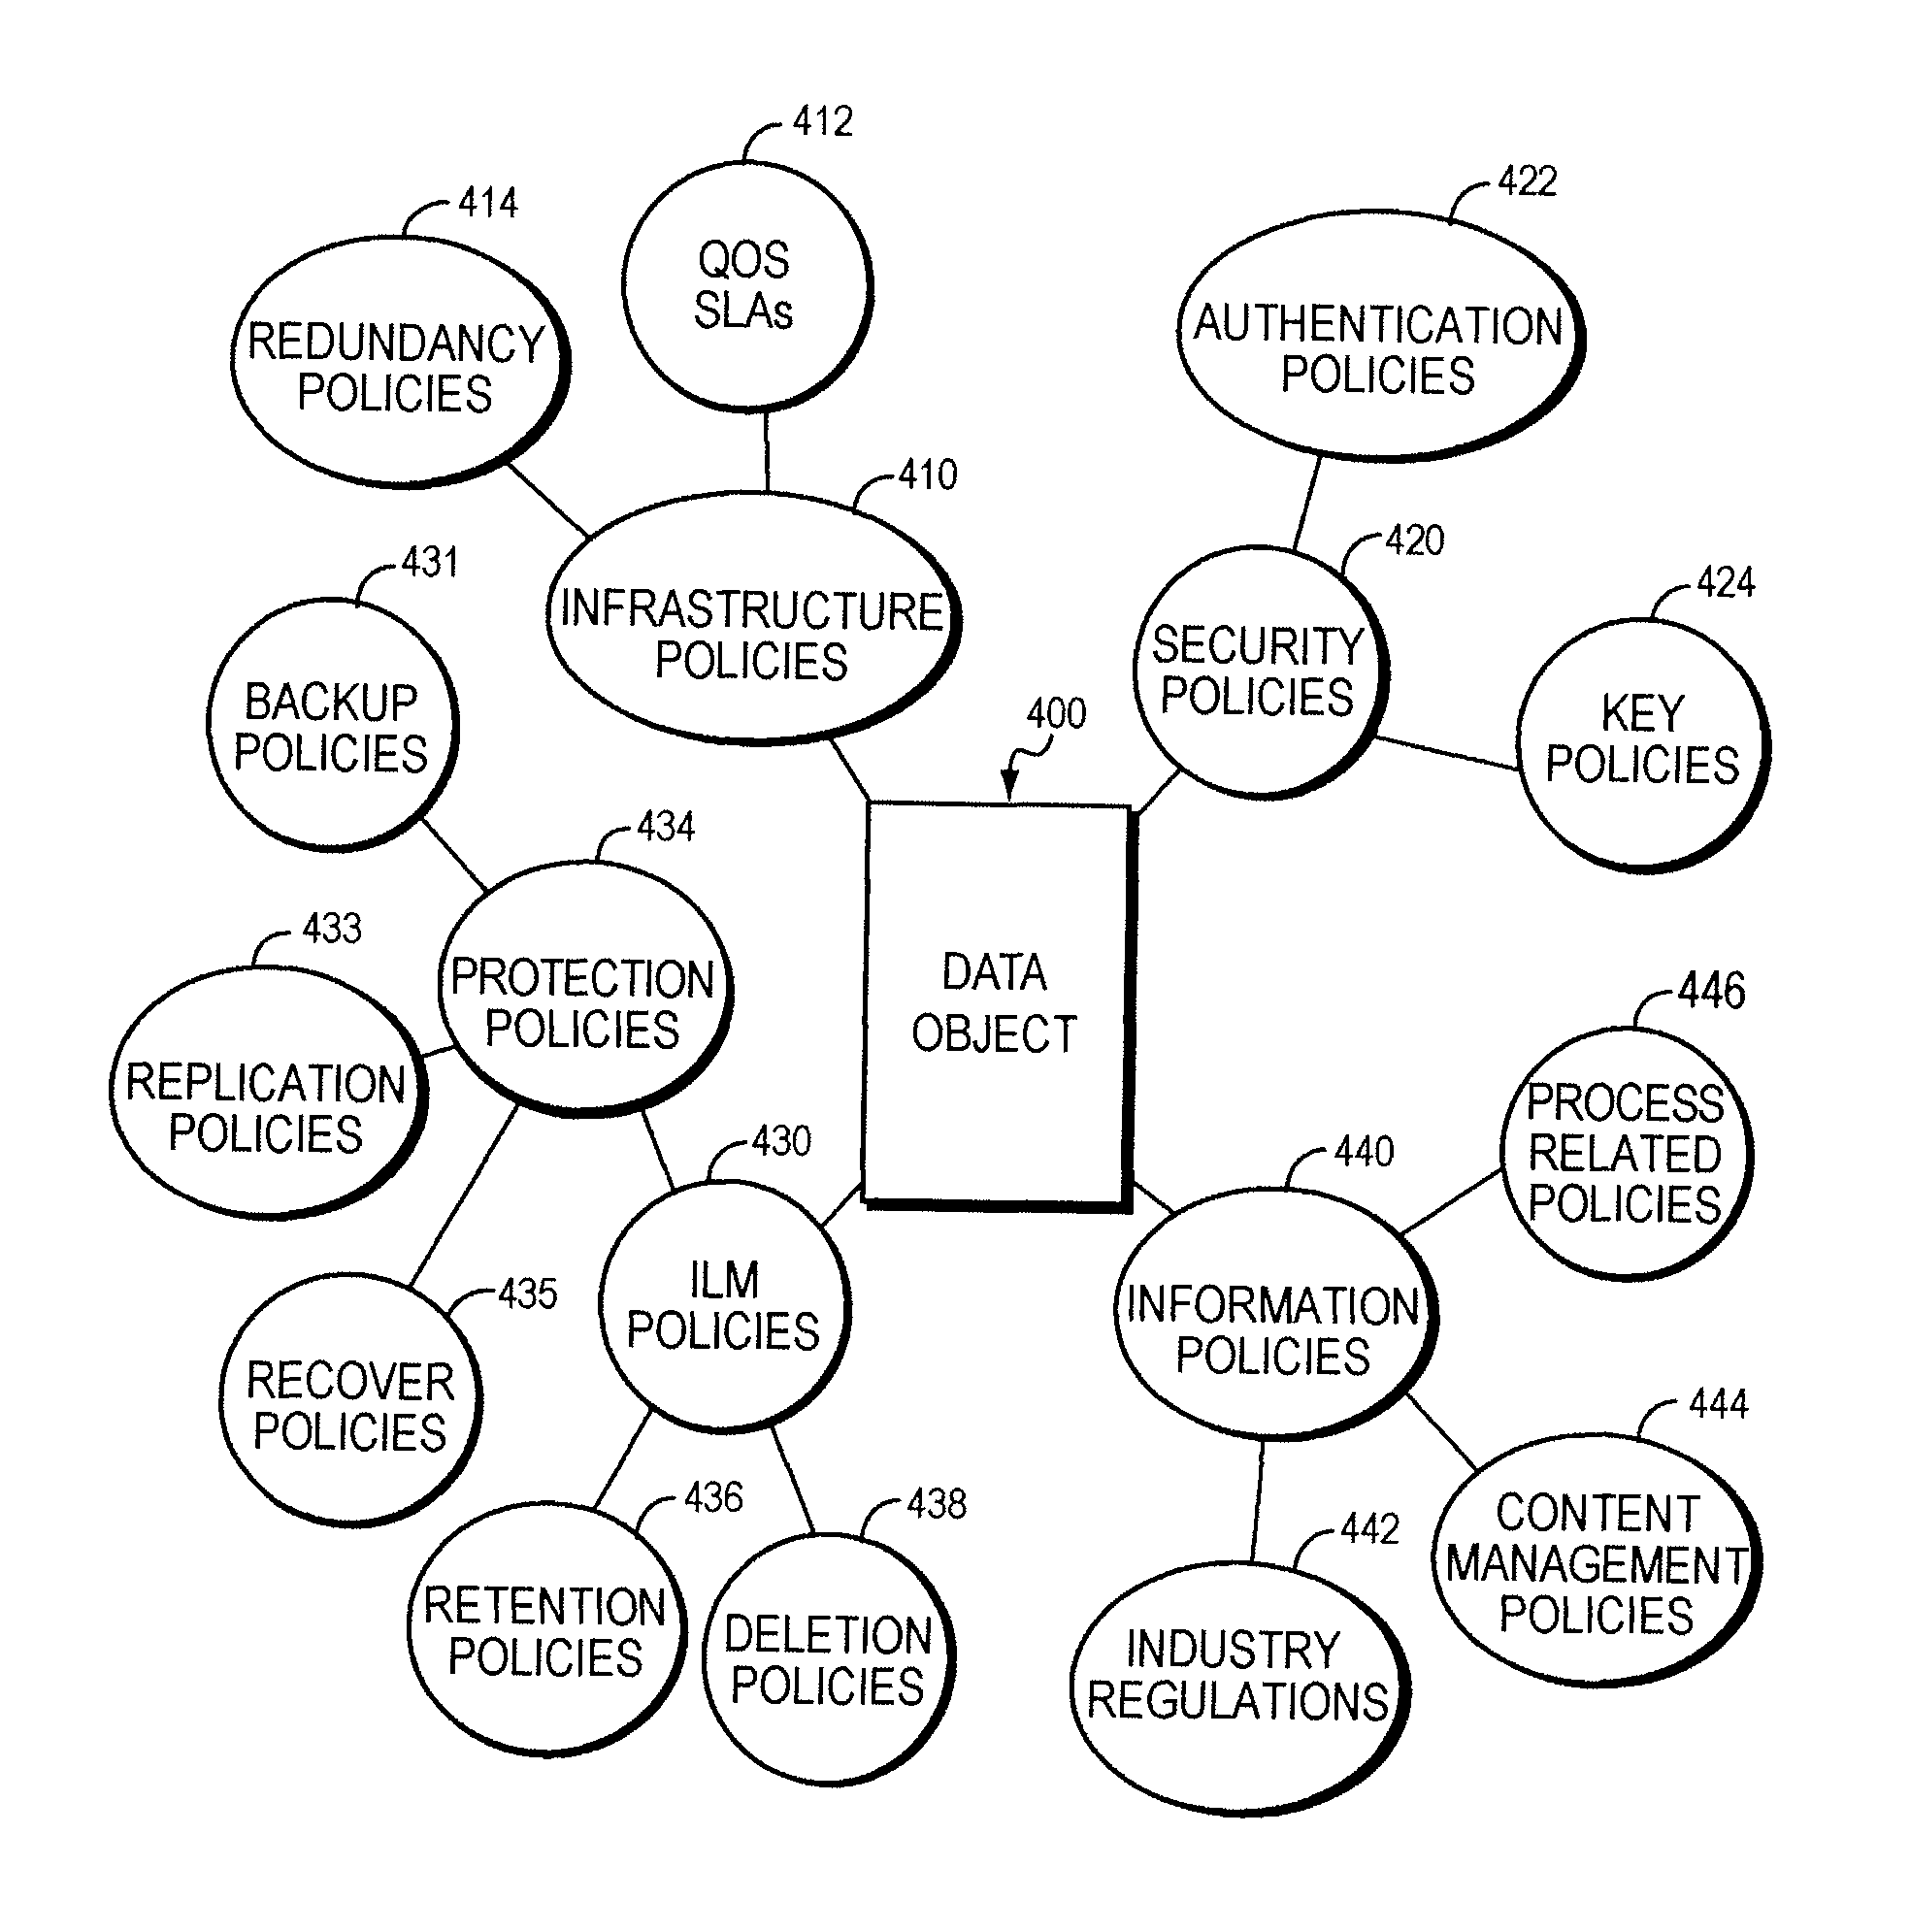 Model driven compliance management system and method